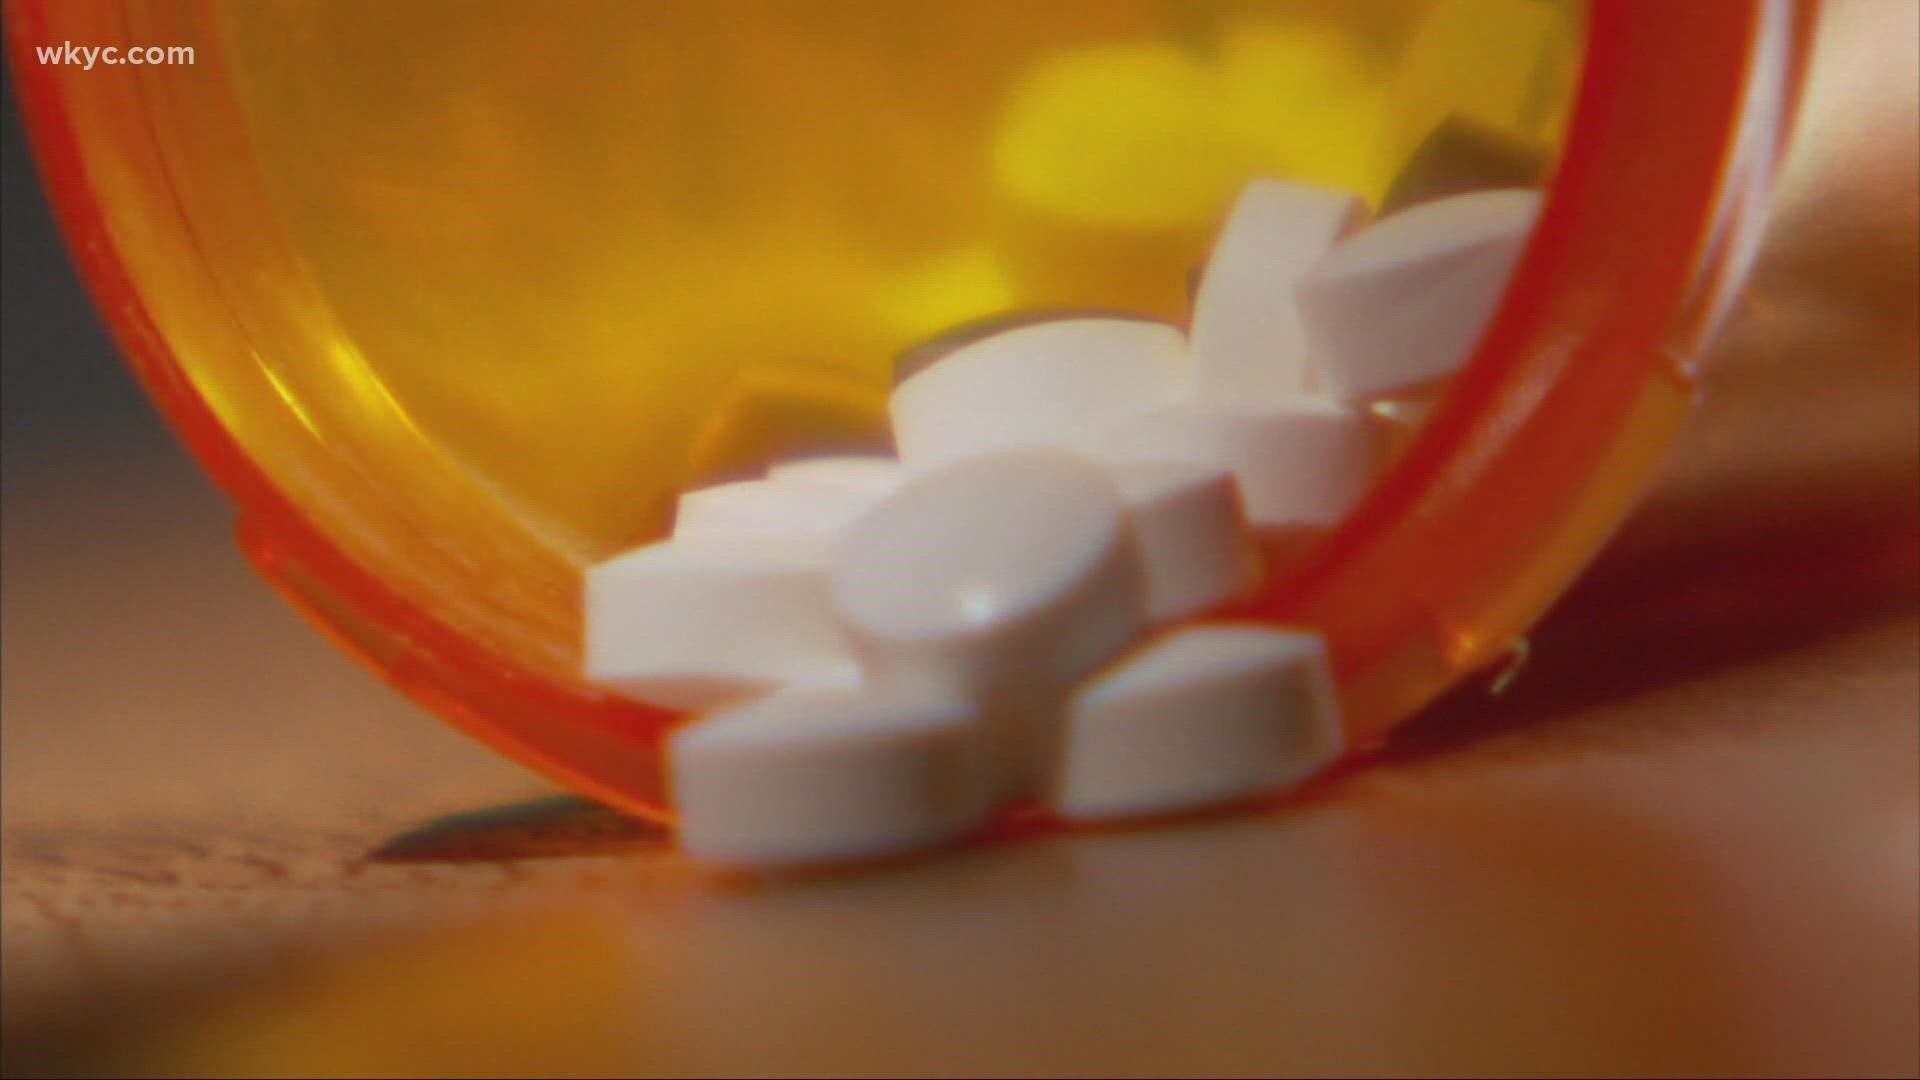 Lawyers for Lake and Trumbull counties say they are seeking a billion dollars for each county from the pharmacy chains after the jury's verdict.